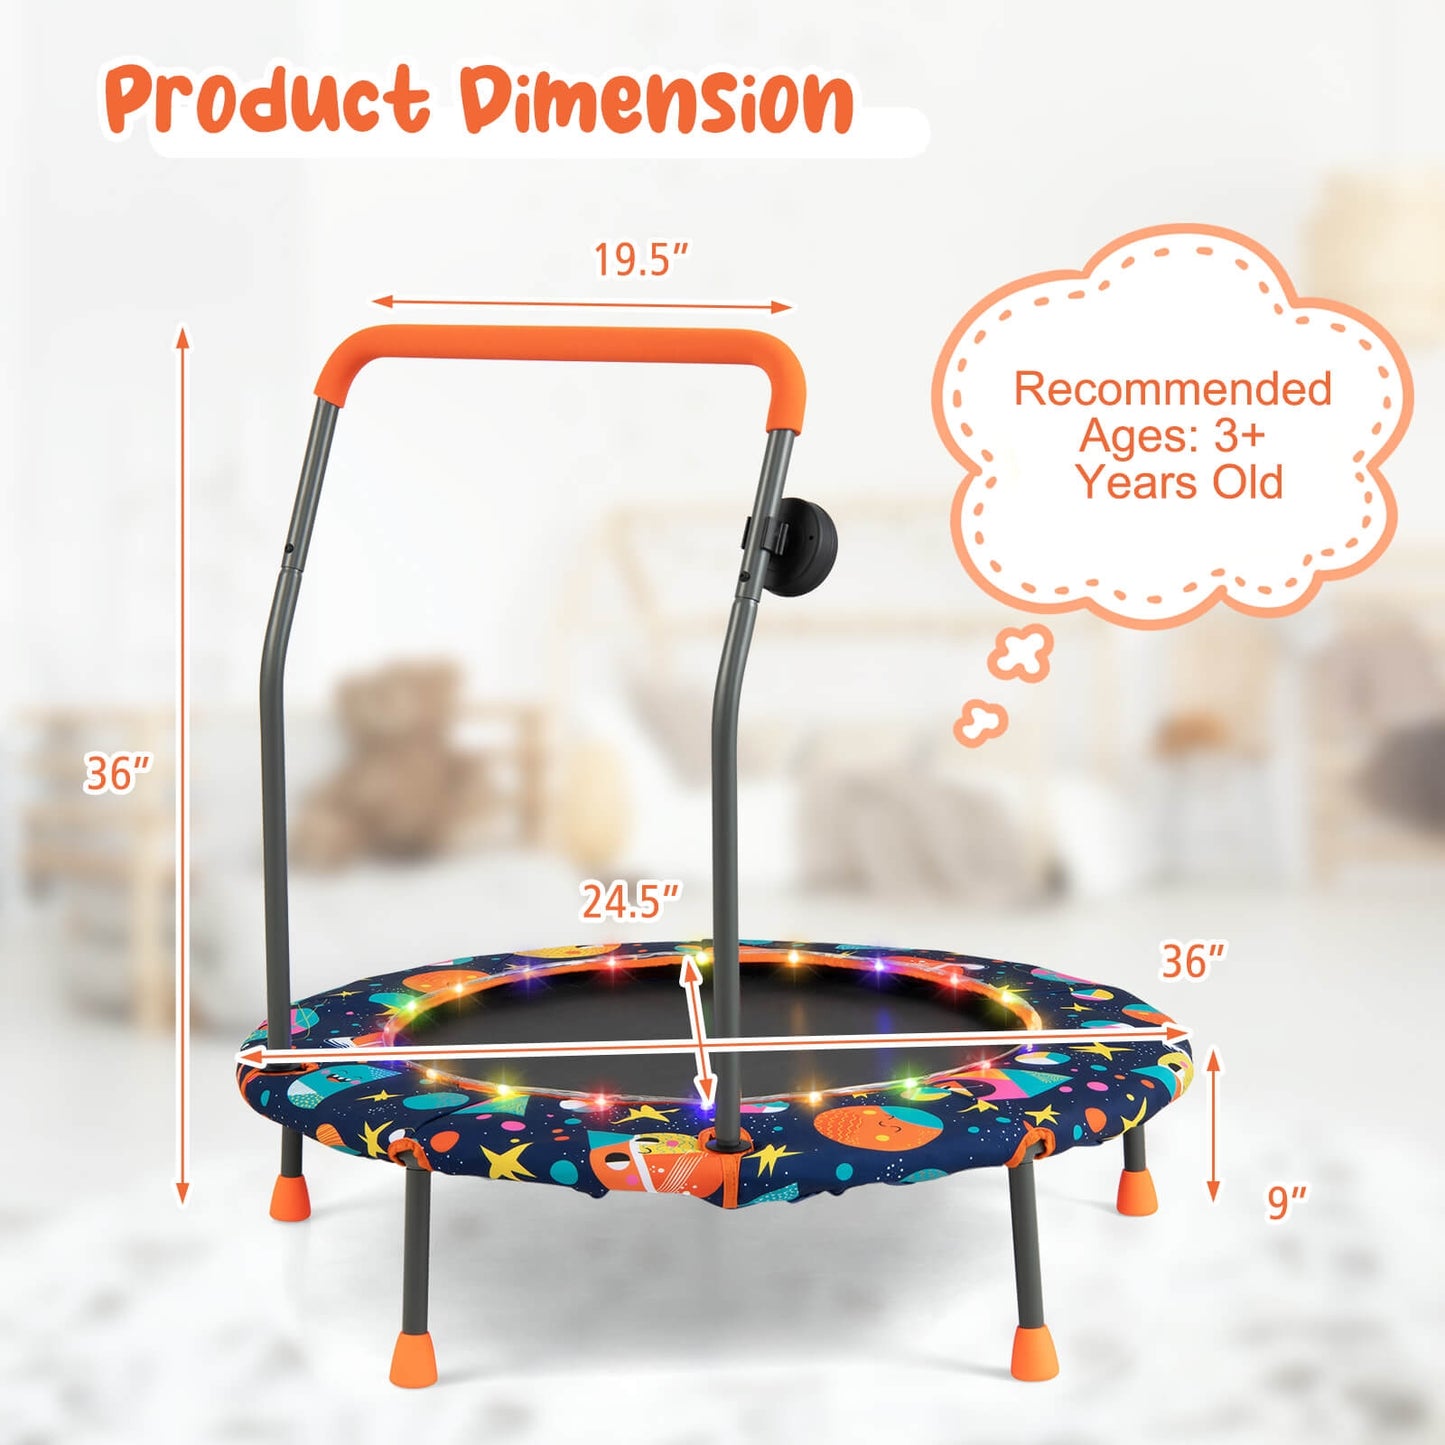 36 Inch Mini Trampoline with Colorful LED Lights and Bluetooth Speaker-Multicolor